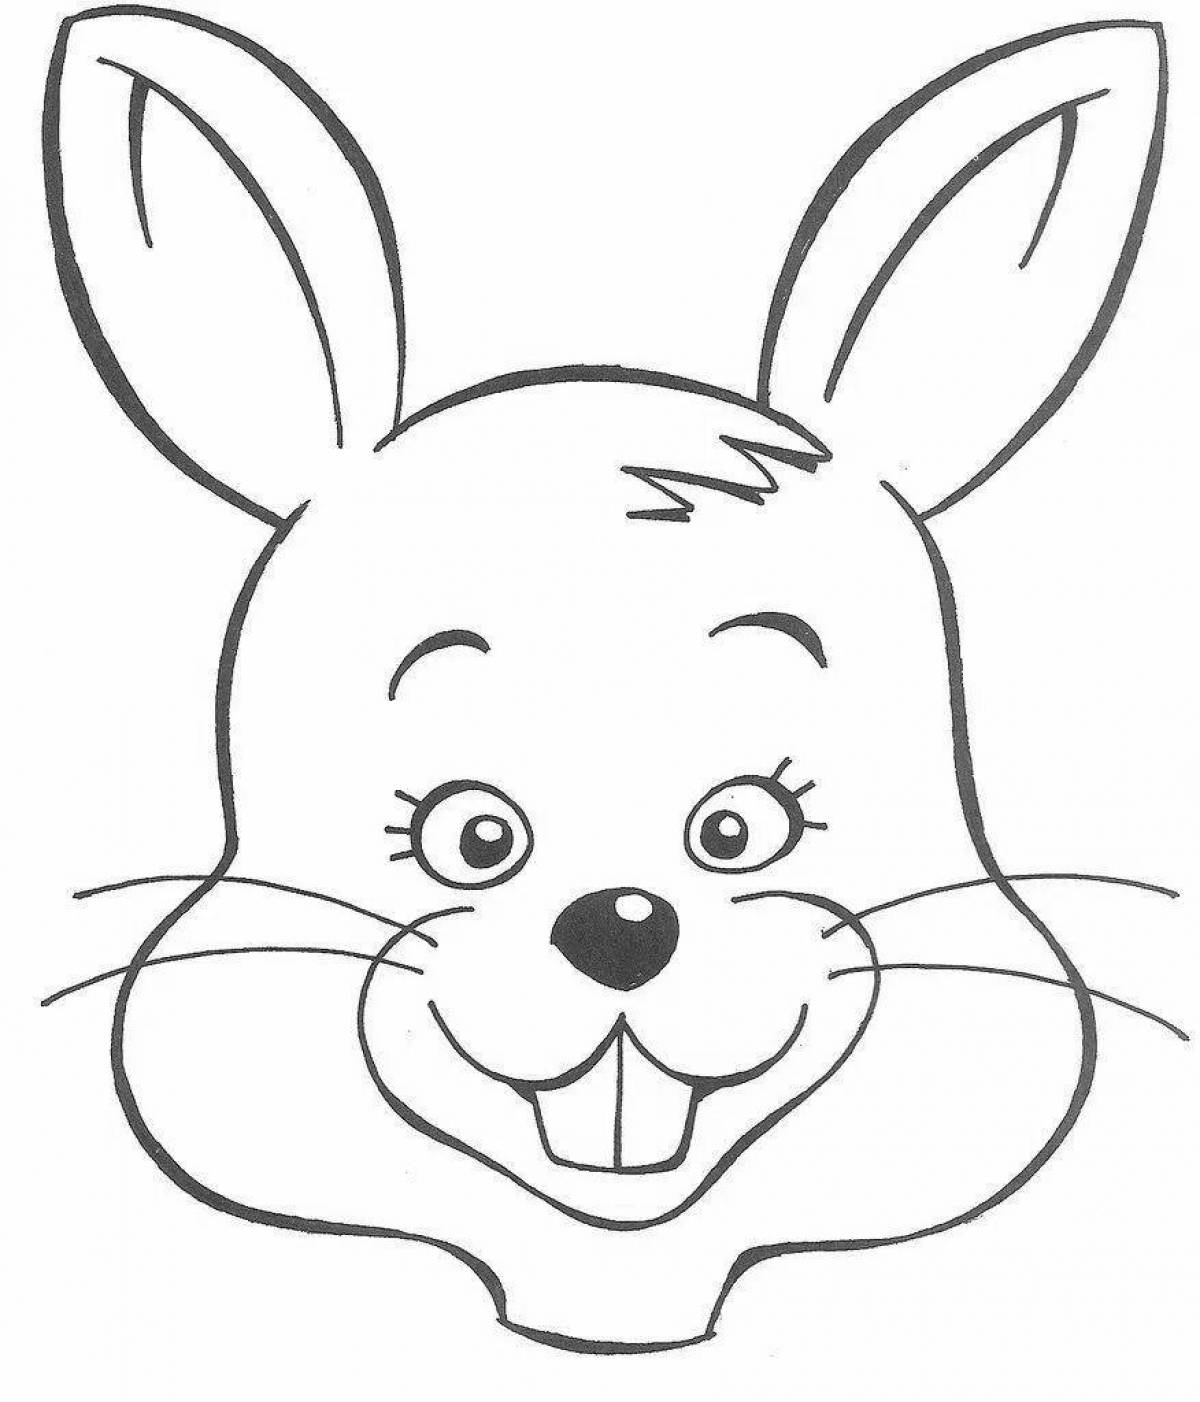 Silly rabbit head coloring book